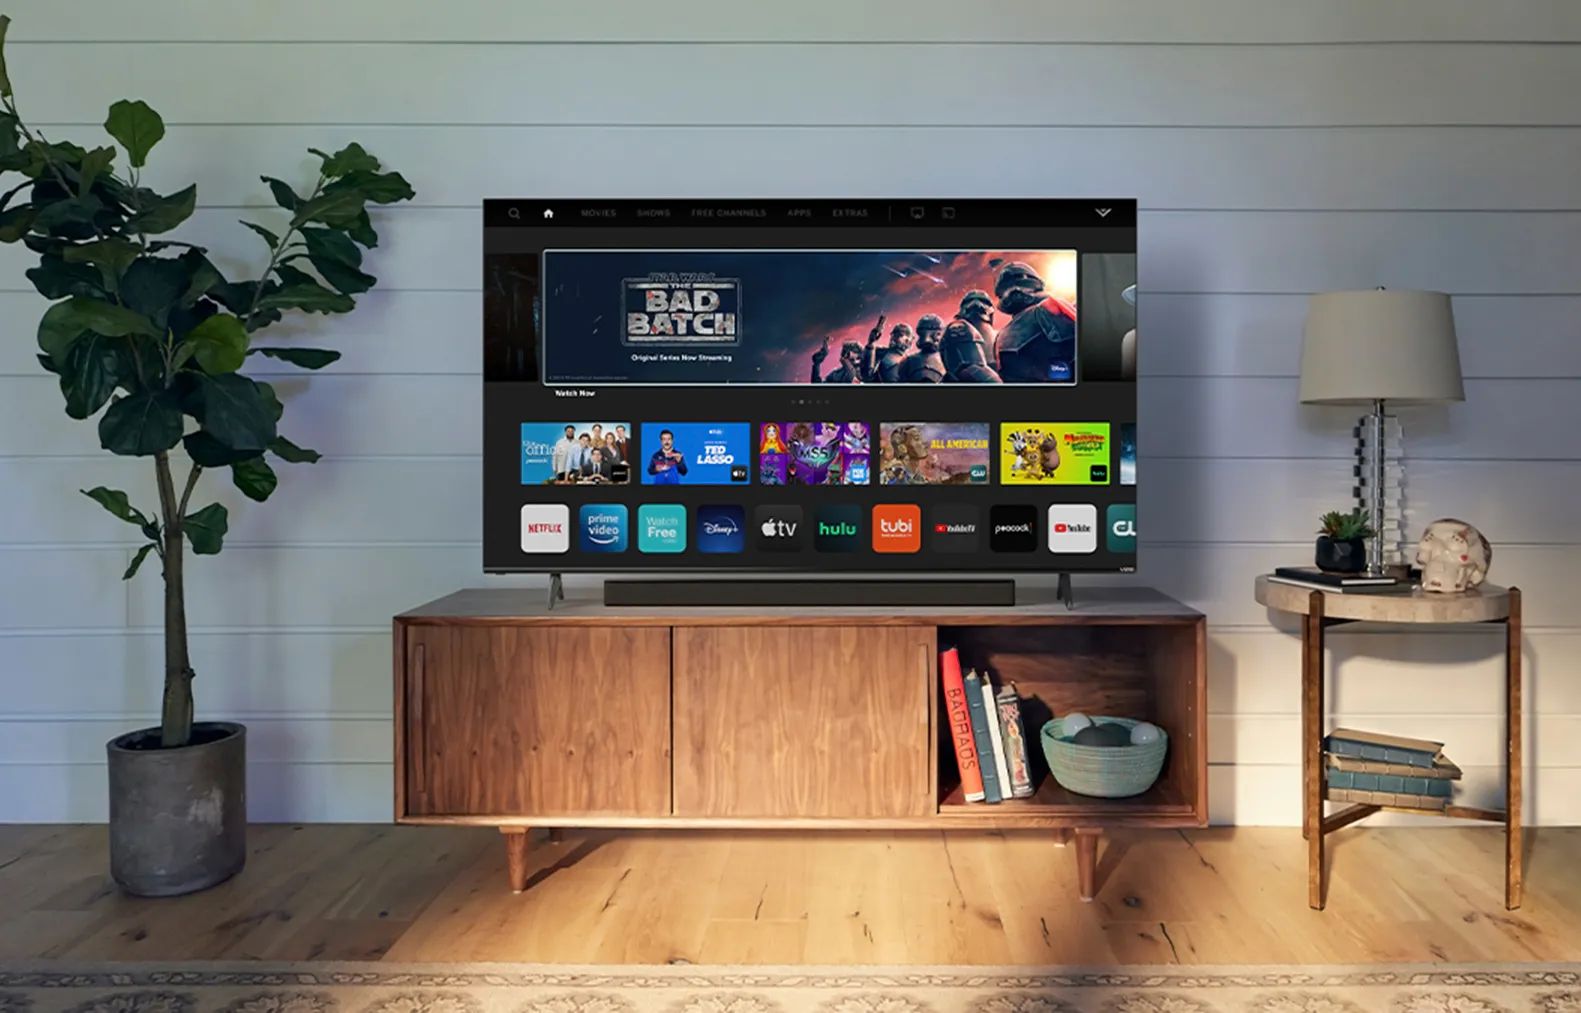 How To Watch Super Bowl On Vizio Smart TV